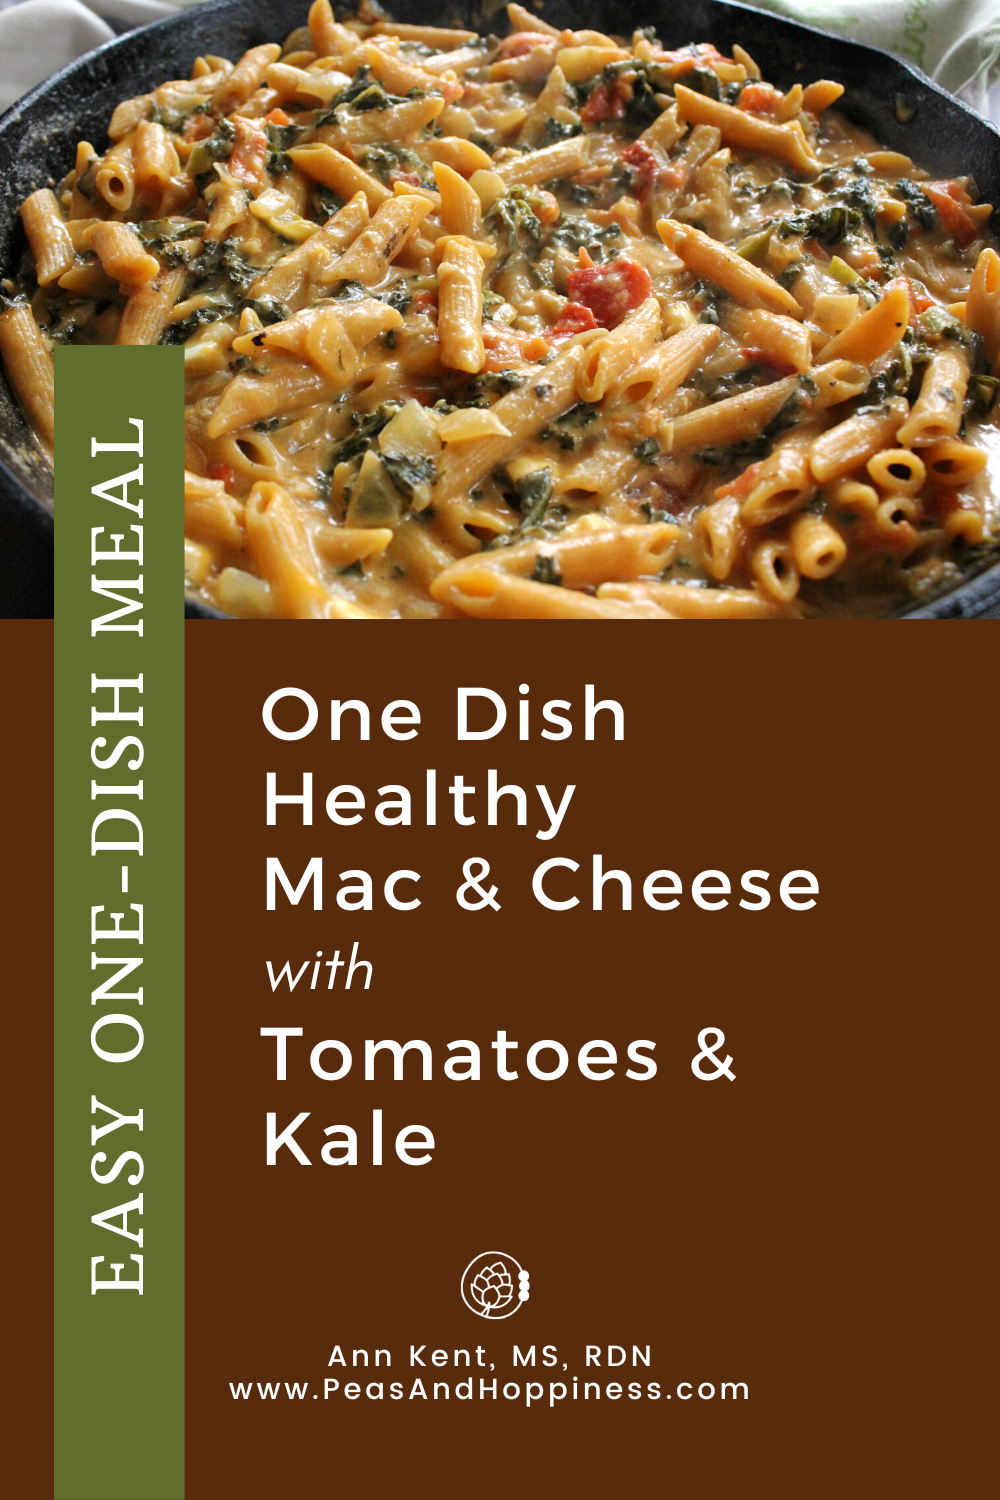 Printable Recipe for One Dish Healthy Mac & Cheese with Tomatoes & Kale - Easy Family-Friendly Recipe from Peas and Hoppiness